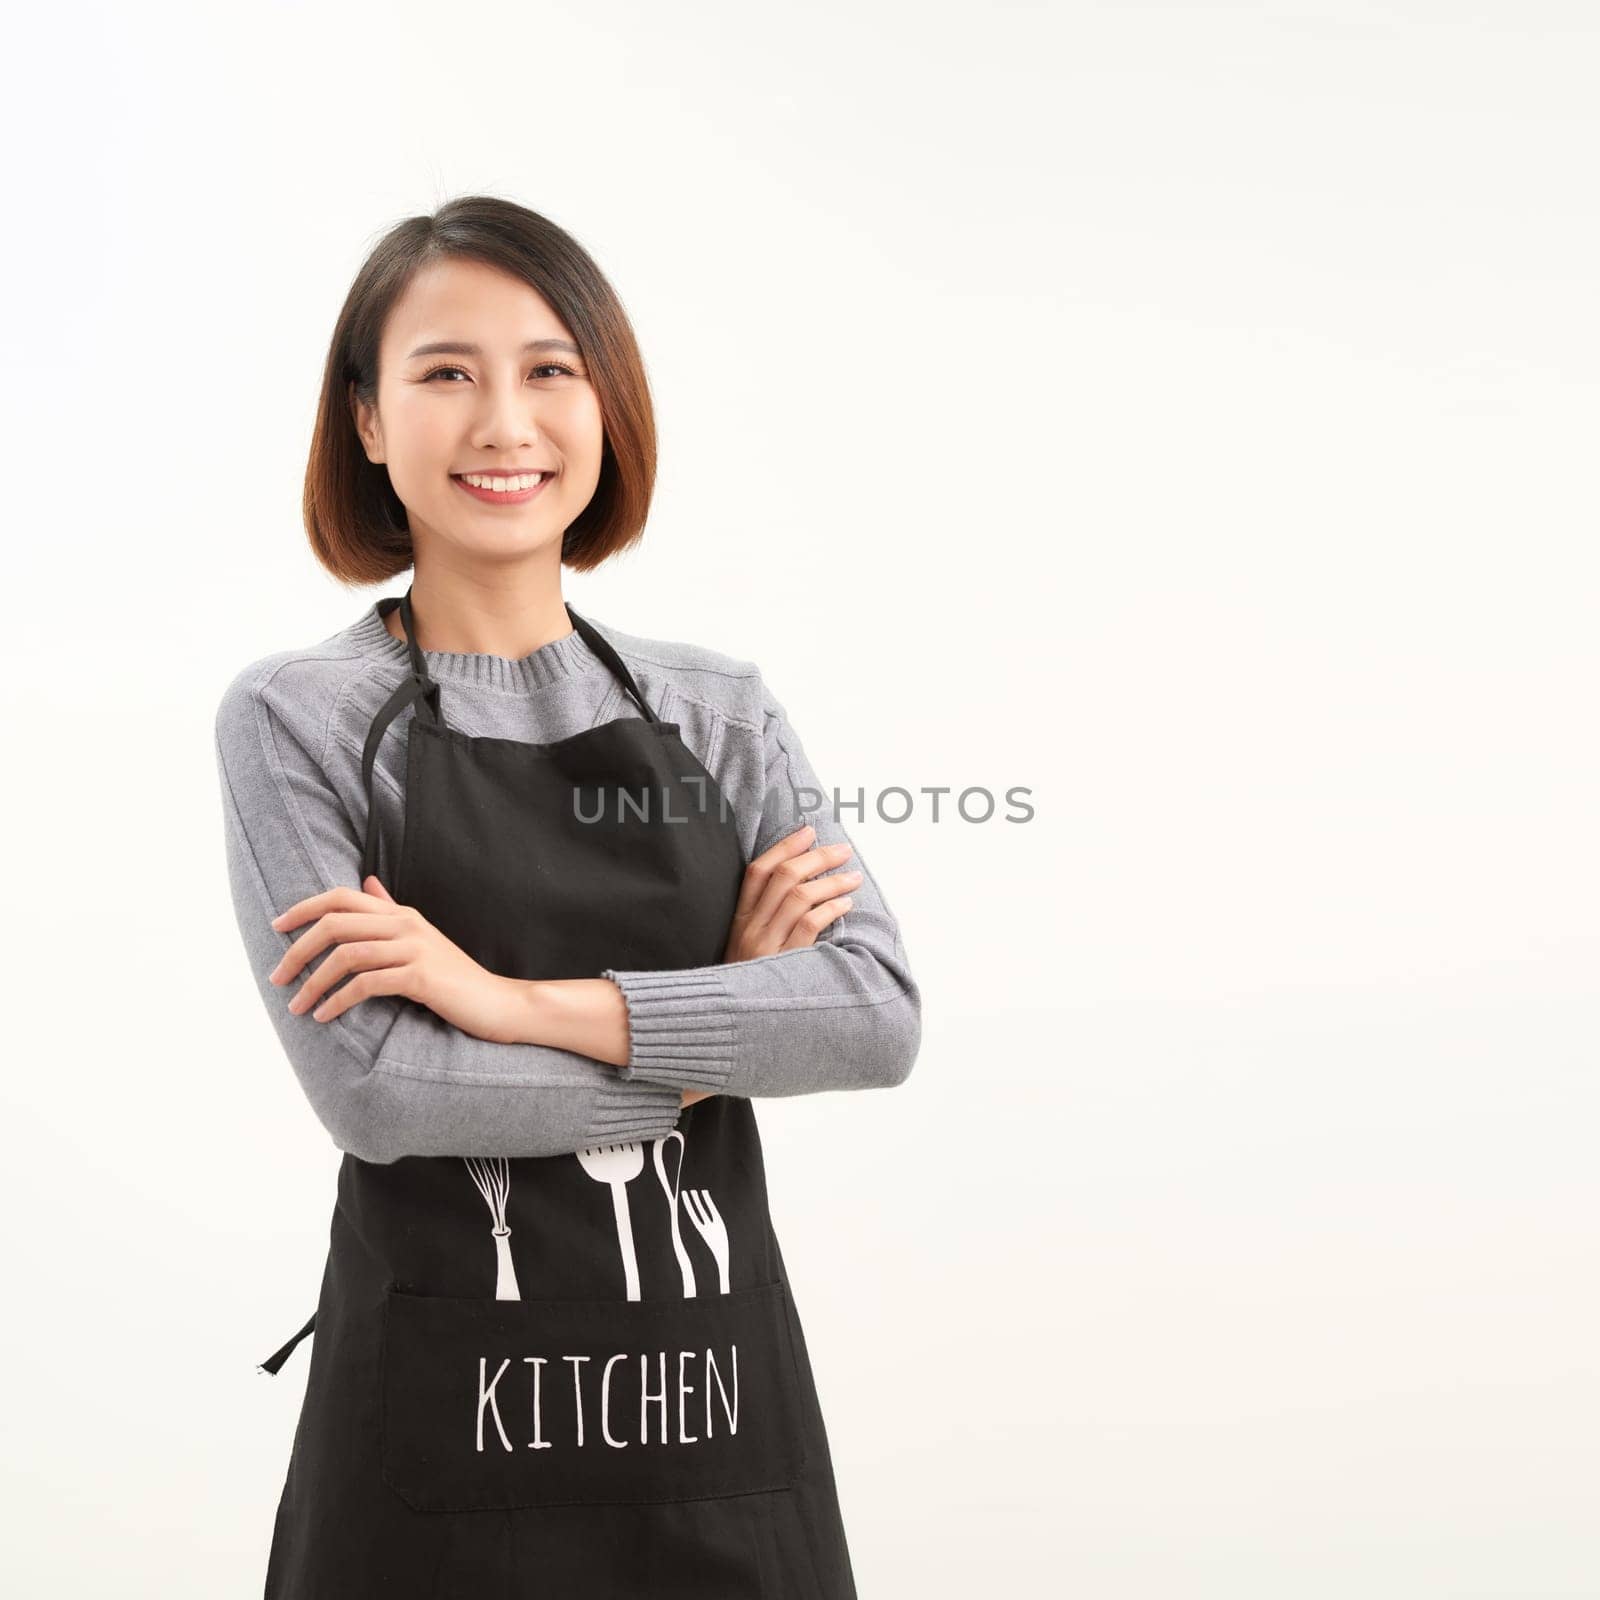 Waitress with black apron and crossed arms